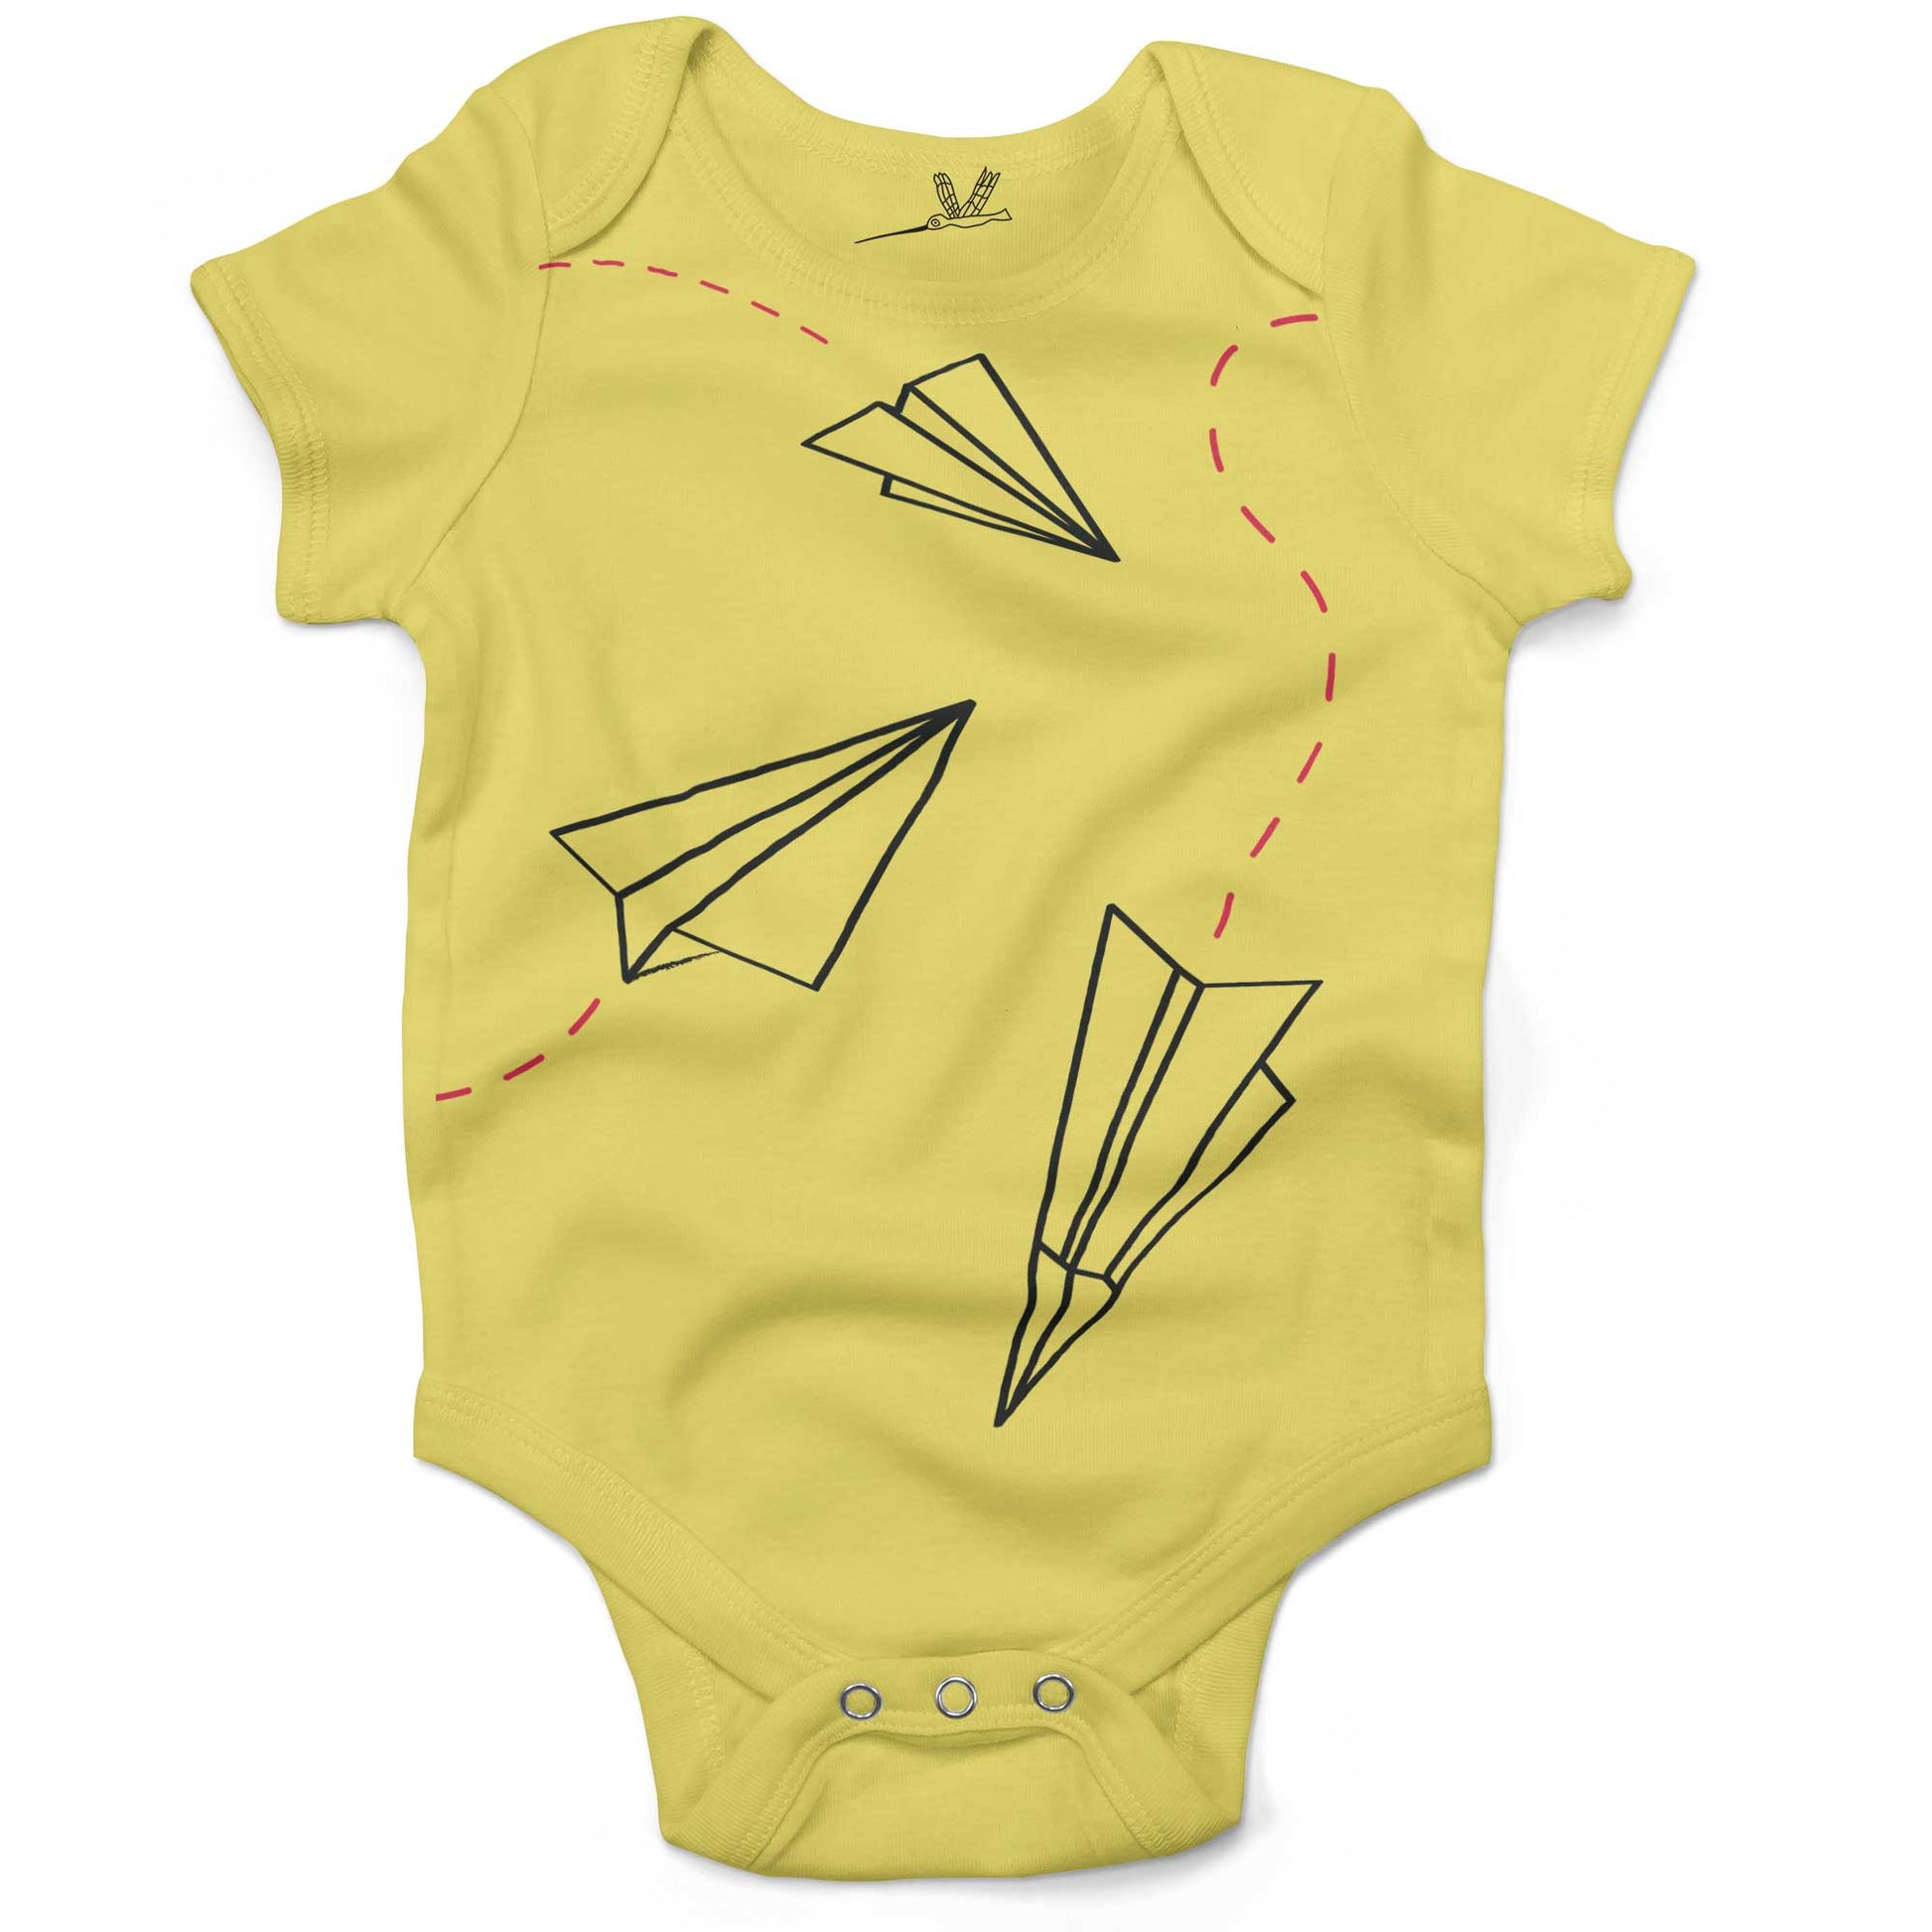 Paper Airplanes Infant Bodysuit or Raglan Baby Tee-Yellow-3-6 months